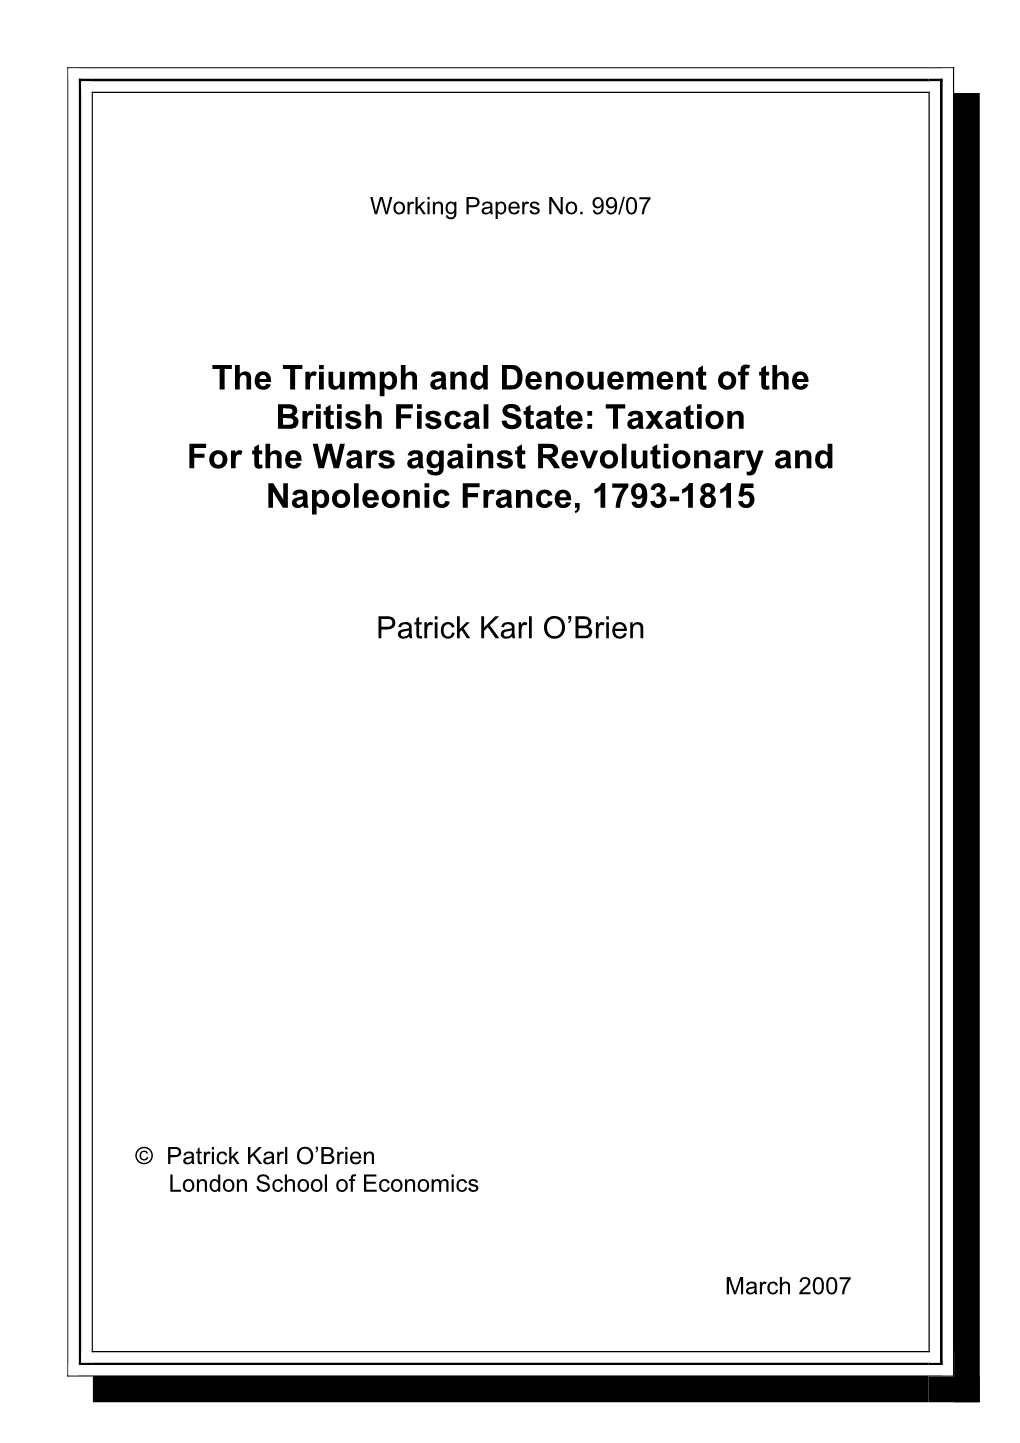 The Triumph and Denouement of the British Fiscal State: Taxation for the Wars Against Revolutionary and Napoleonic France, 1793-1815